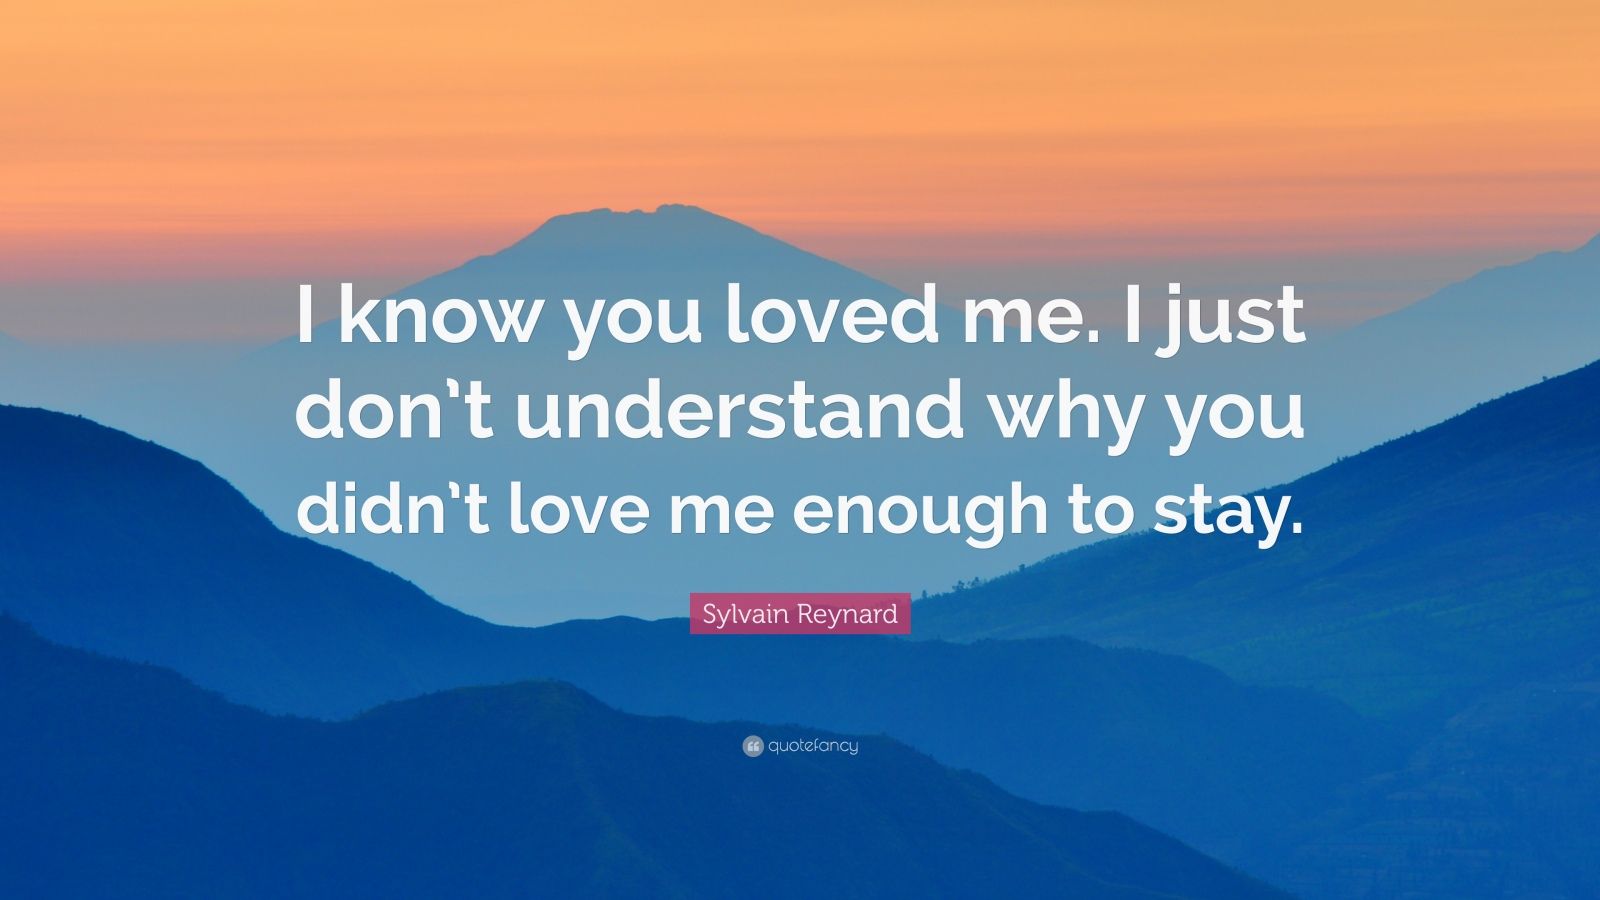 Sylvain Reynard Quote: “I know you loved me. I just don’t understand ...